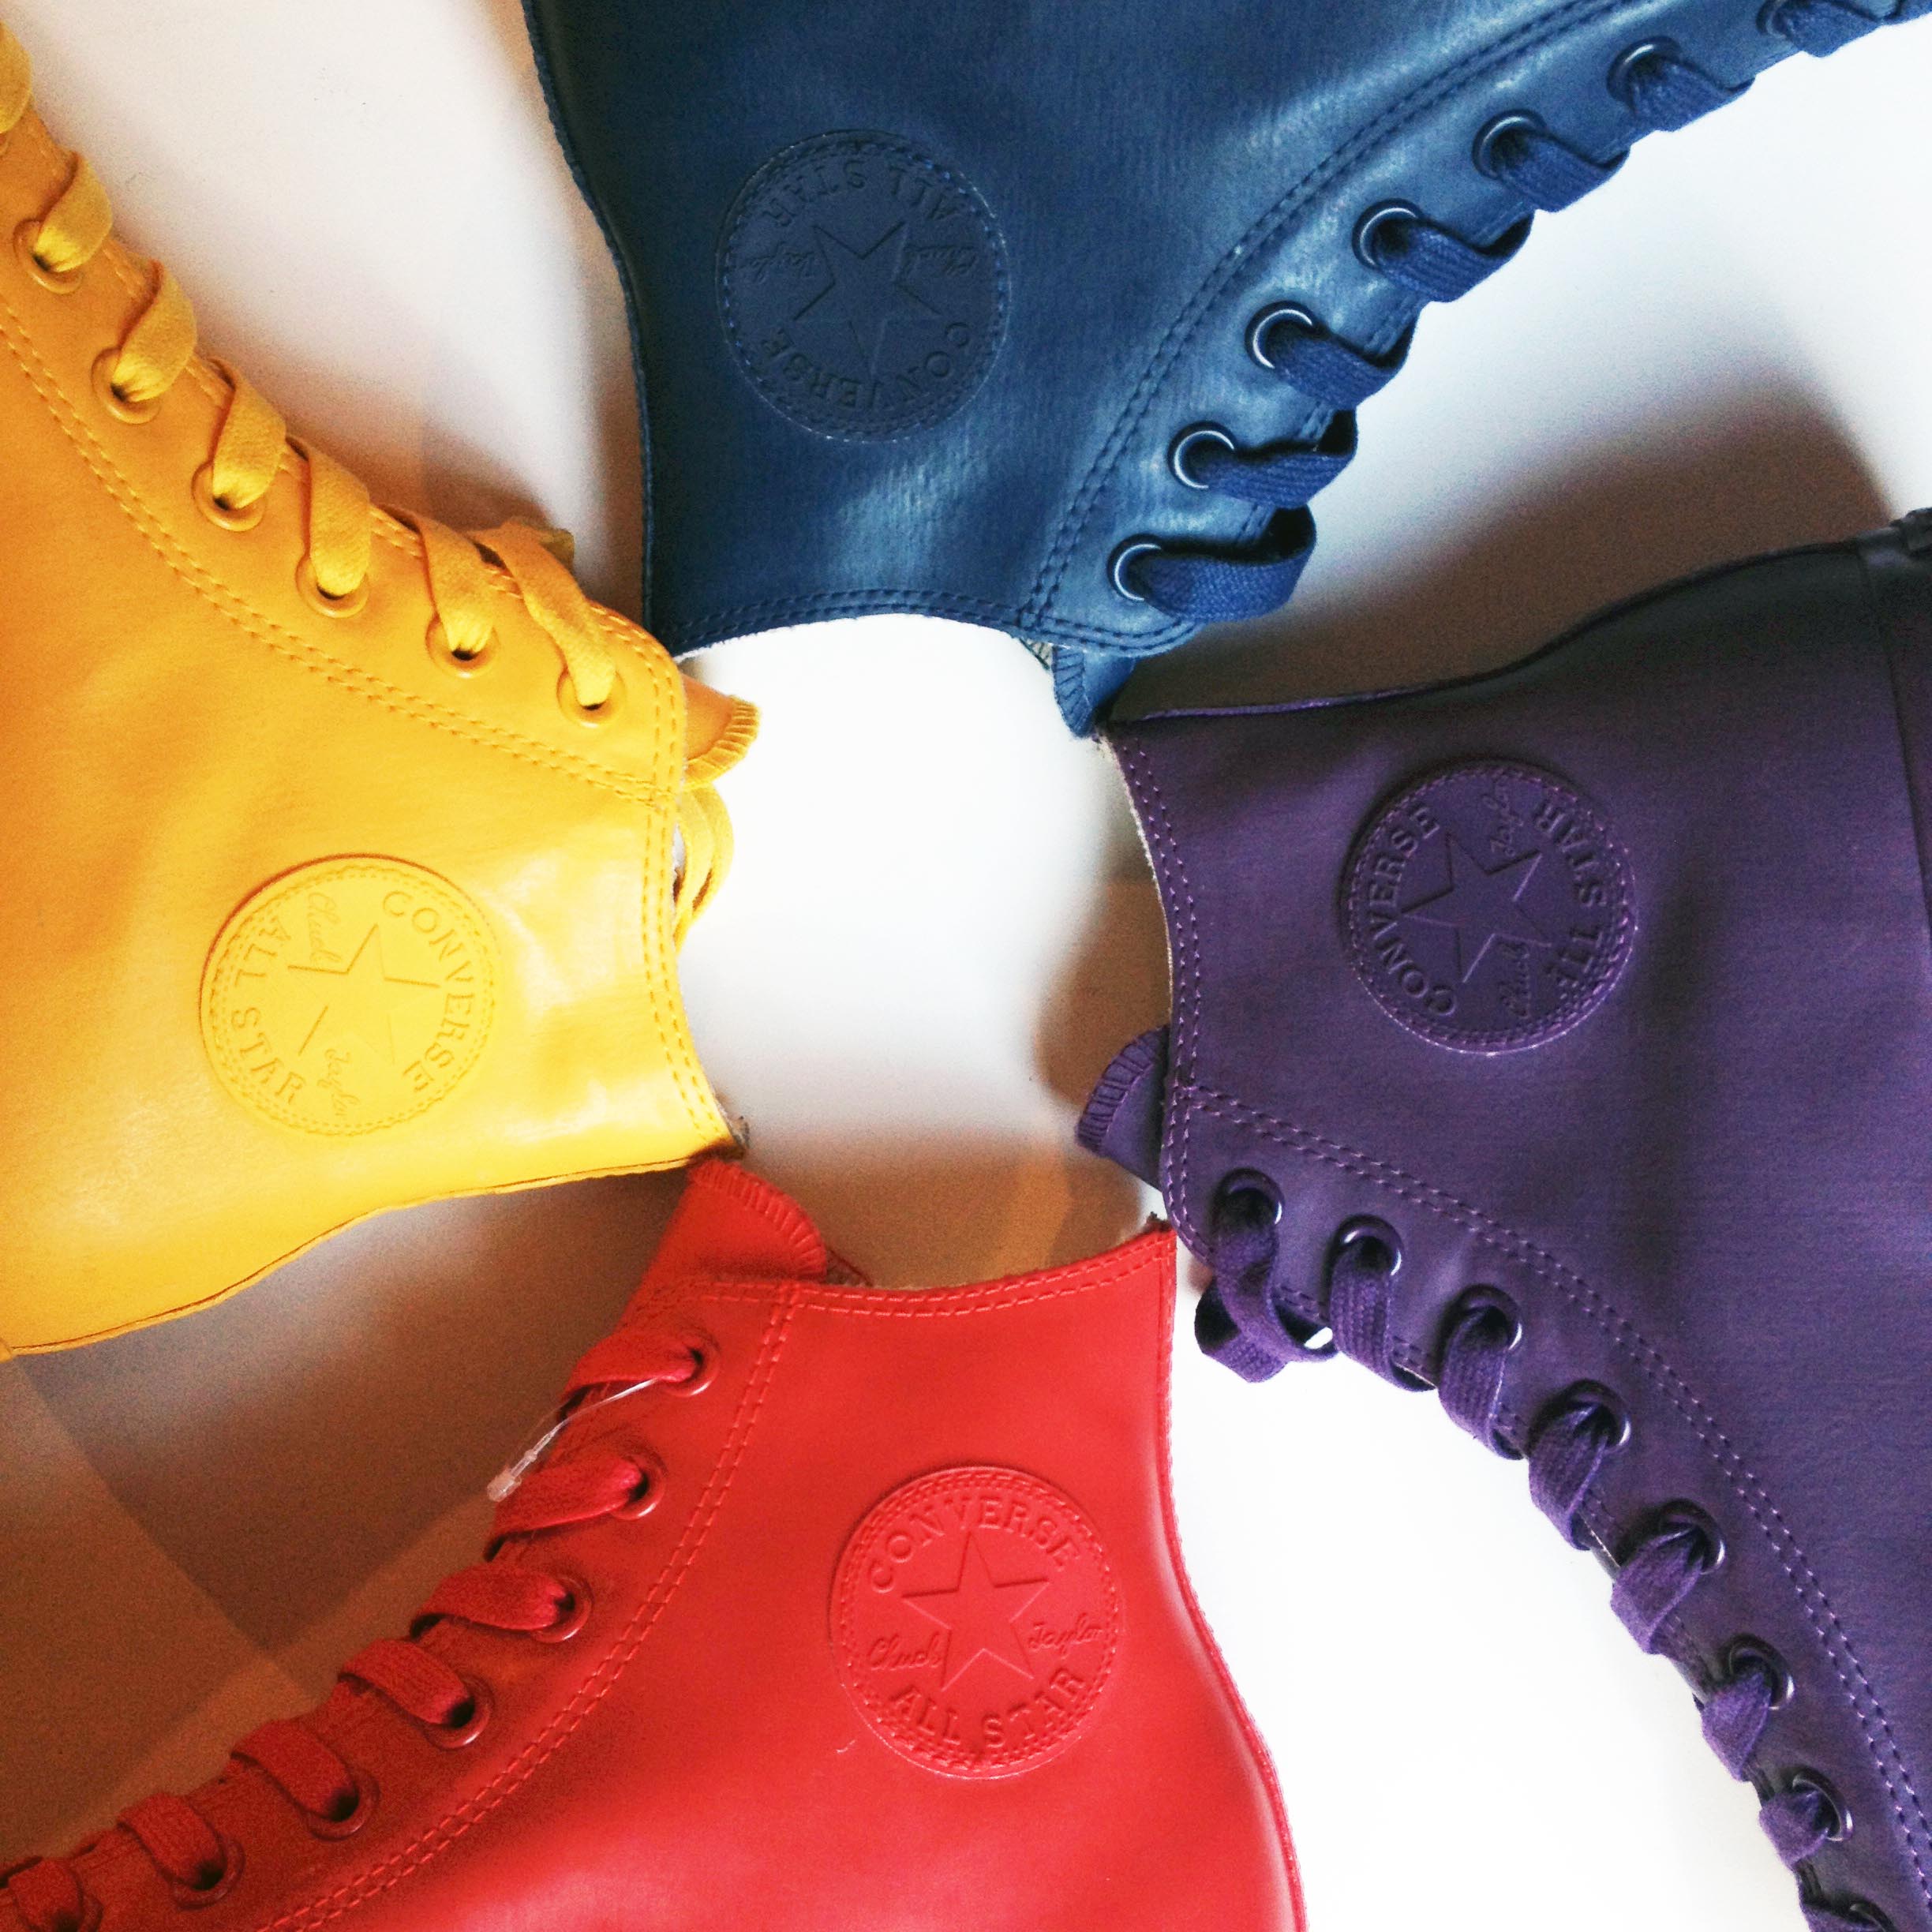 Waterproof-Converse-Sneakers-Bright-Colours-High-Tops | A Side Of Style